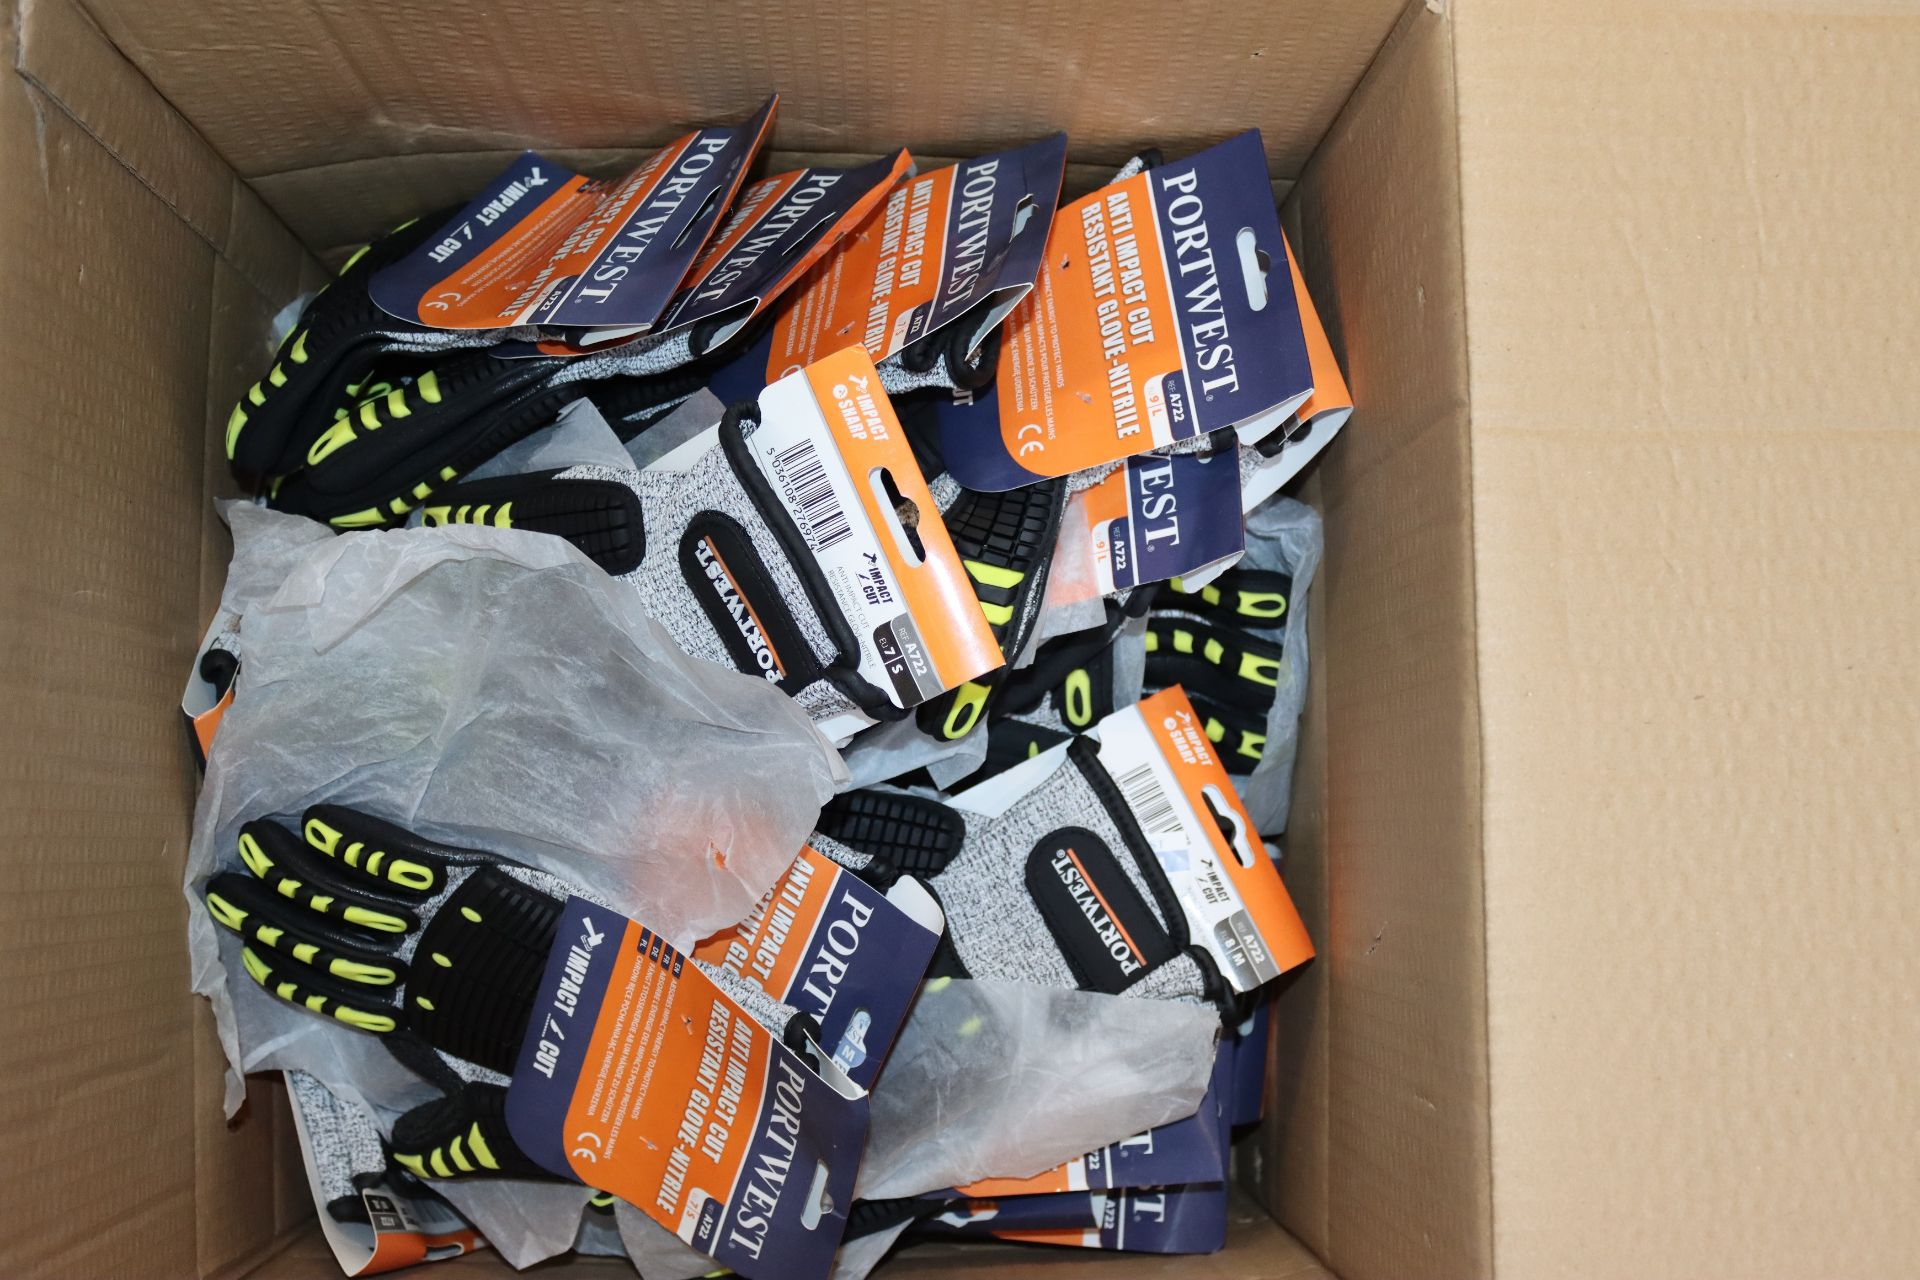 Thirty as new Portwest anti impact cut resistant nitrile gloves in assorted sizes.